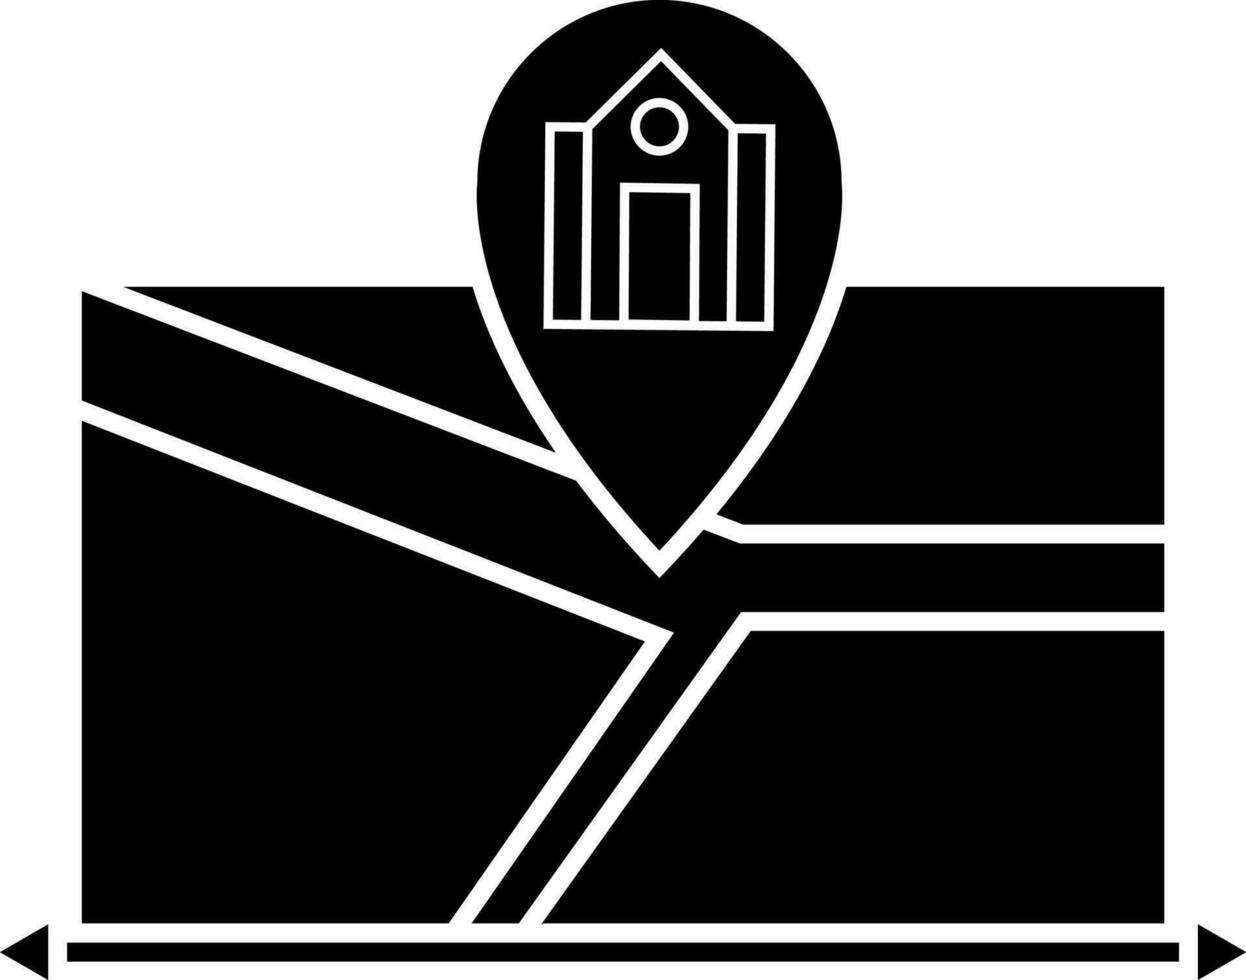 Black and White map location icon for real estate. vector